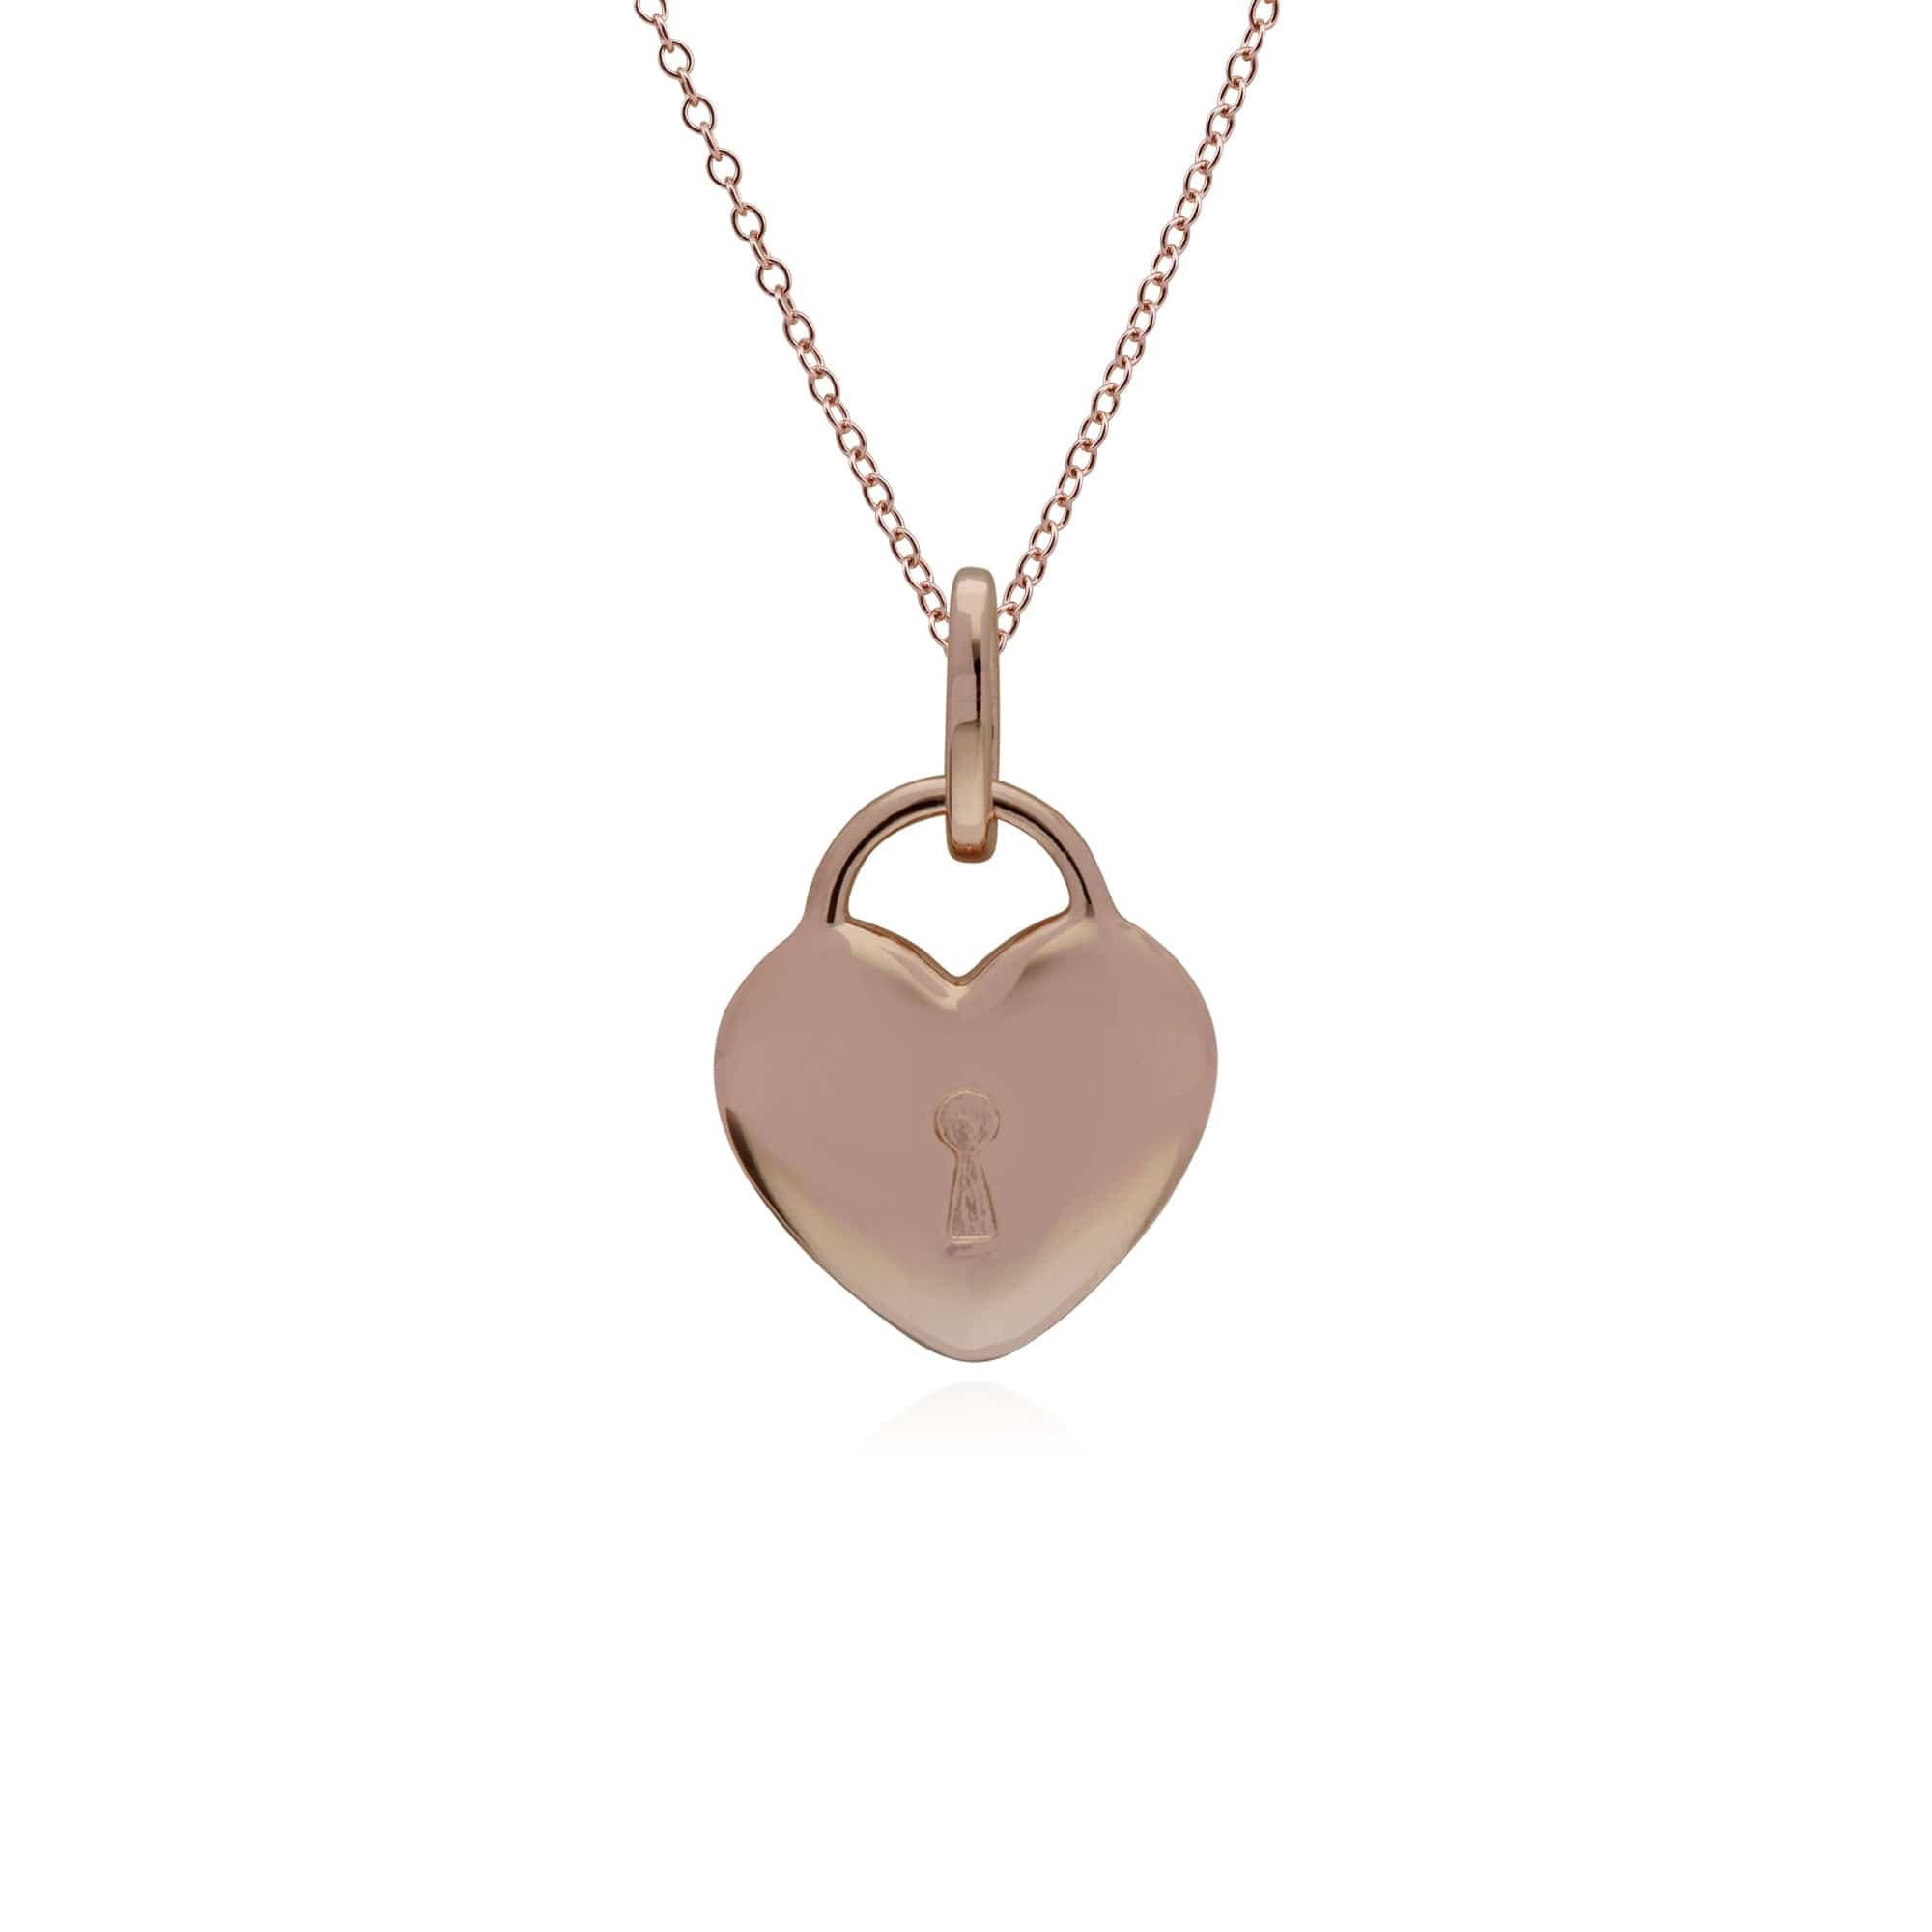 270P026705925-270P026901925 Classic Heart Lock Pendant & Amethyst Big Key Charm in Rose Gold Plated 925 Sterling Silver 3